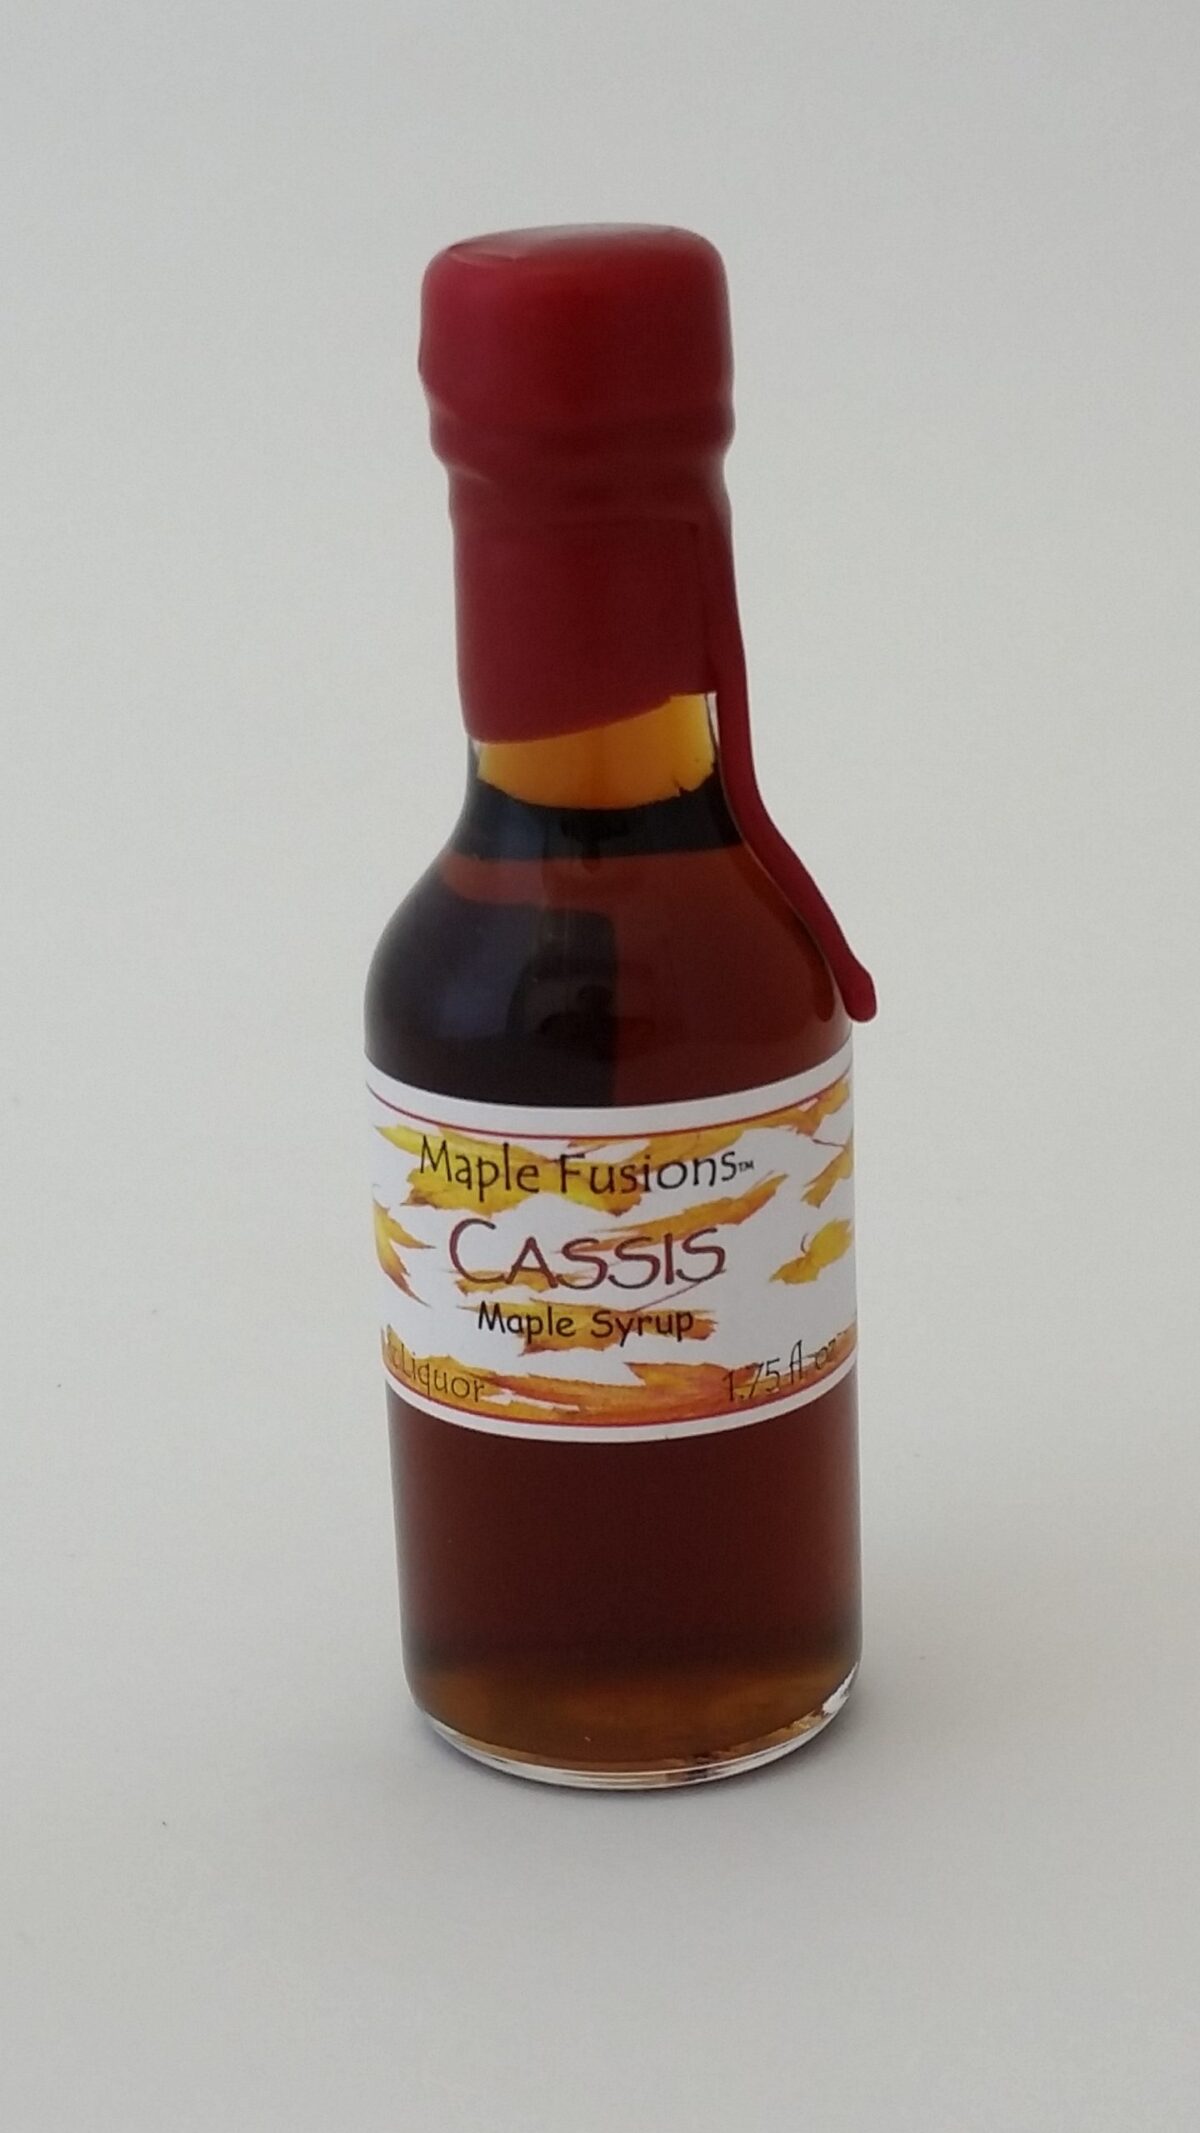 Maple Fusions Cassis Maple Syrup Nip